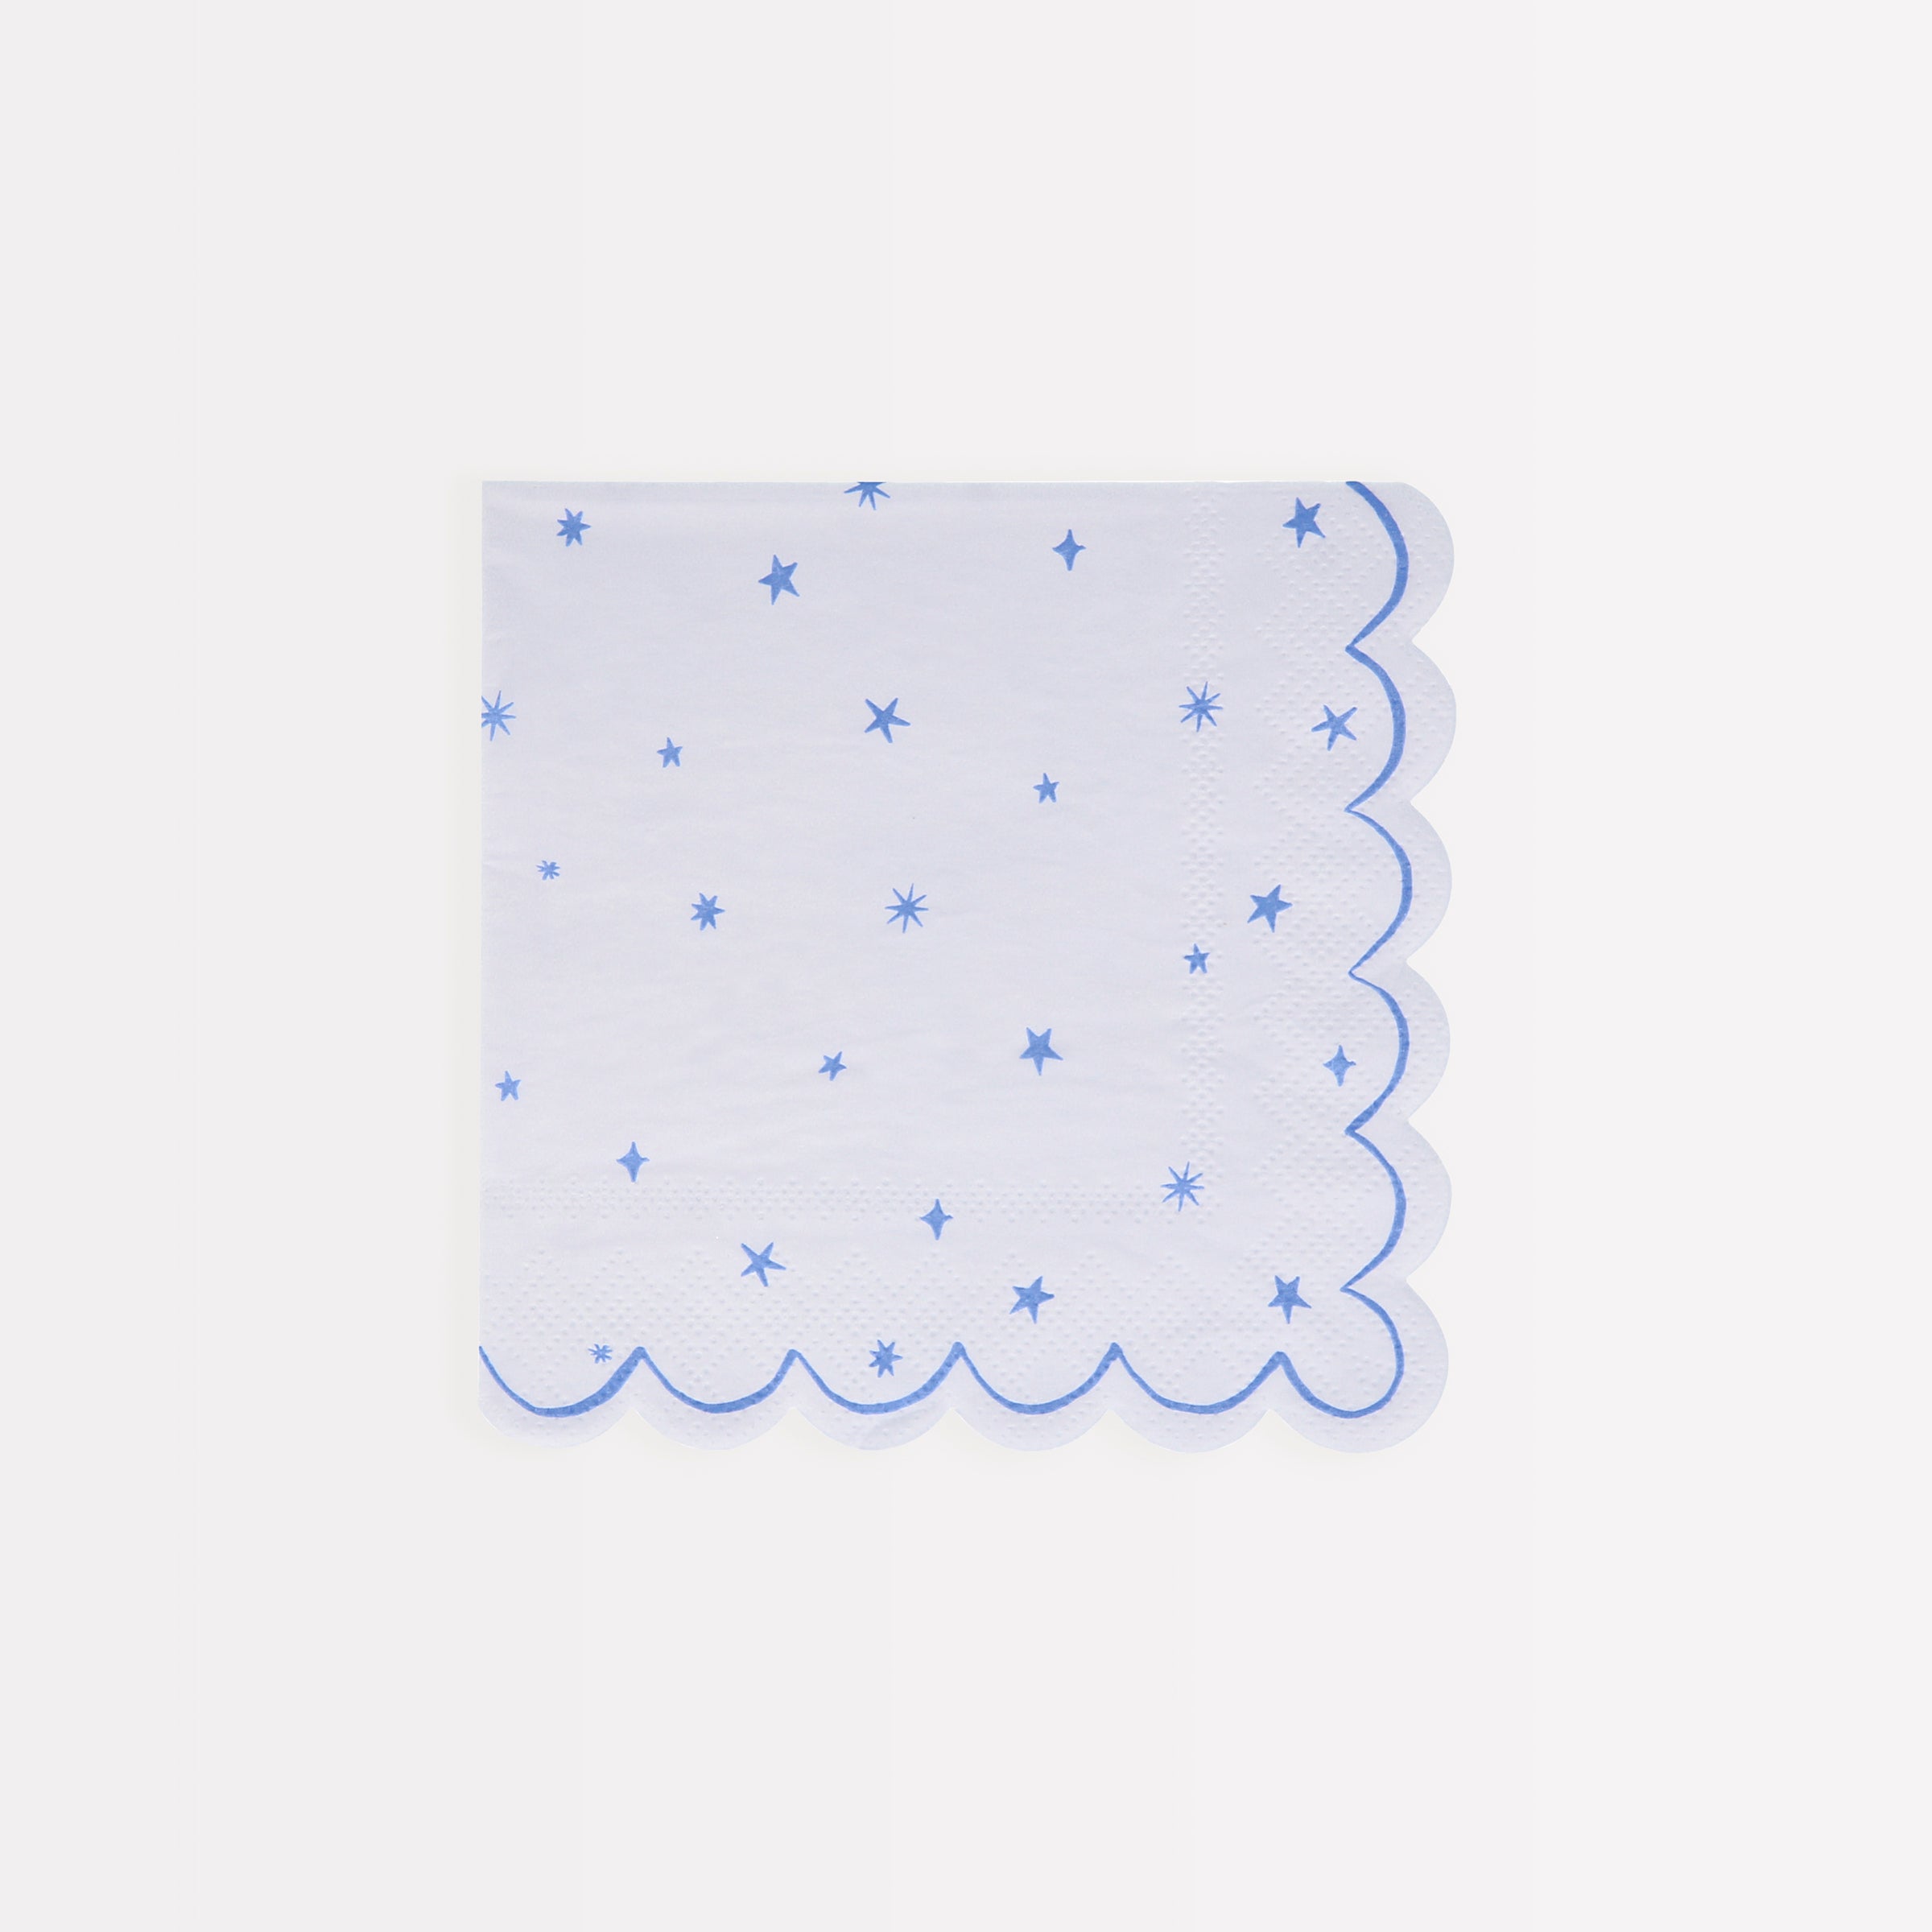 Our paper napkin set features a stylish star design and includes blue napkins, pink napkins and mint napkins.